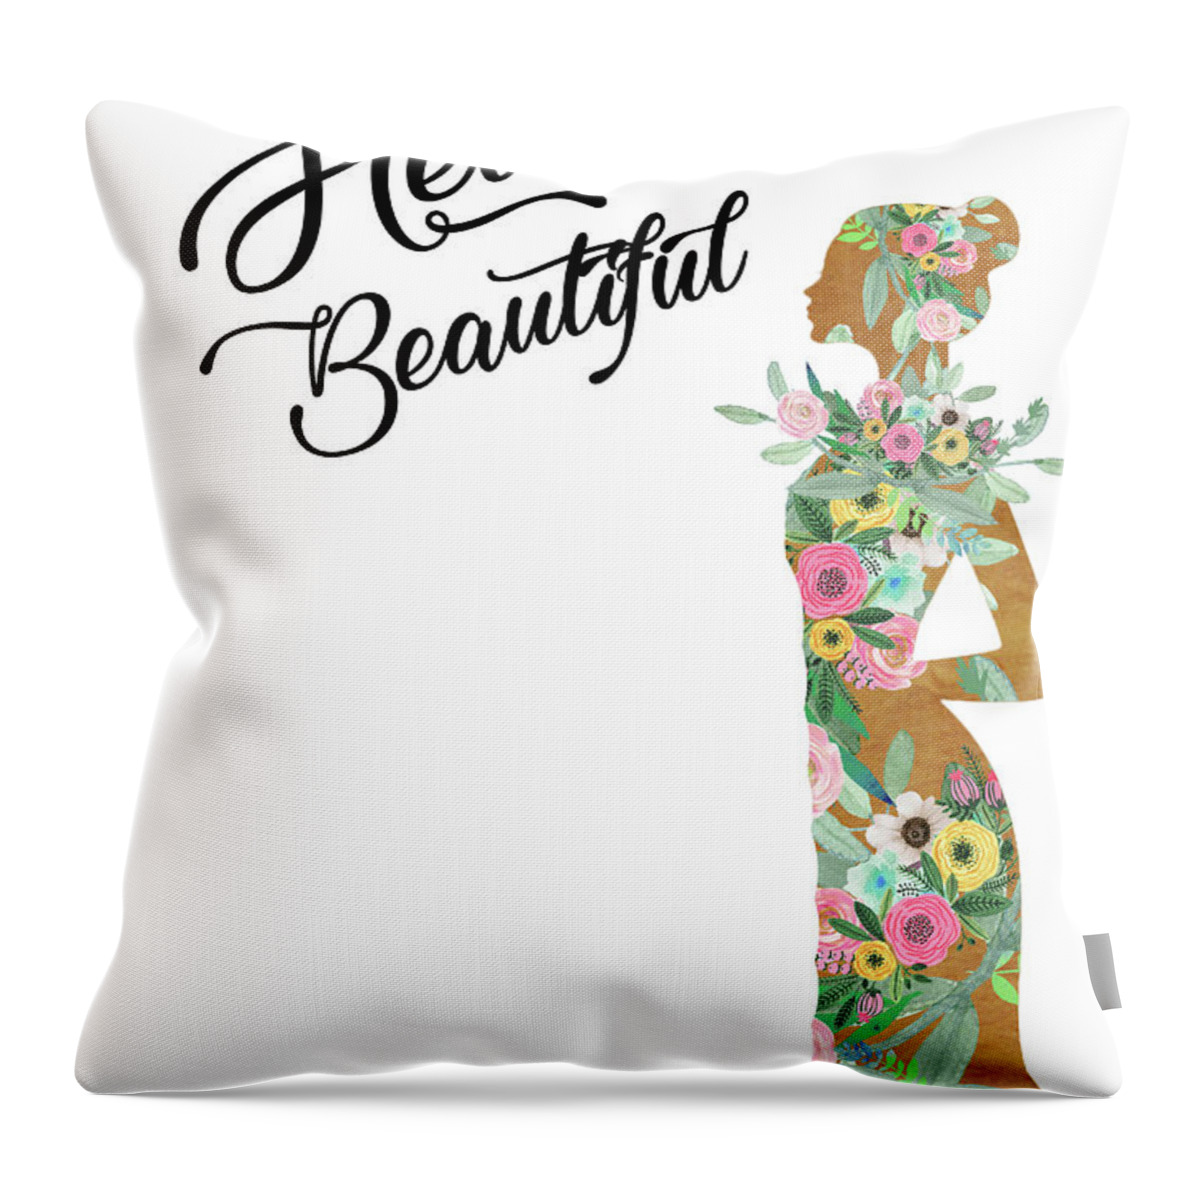 Woman Throw Pillow featuring the mixed media Hello Beautiful by Claudia Schoen